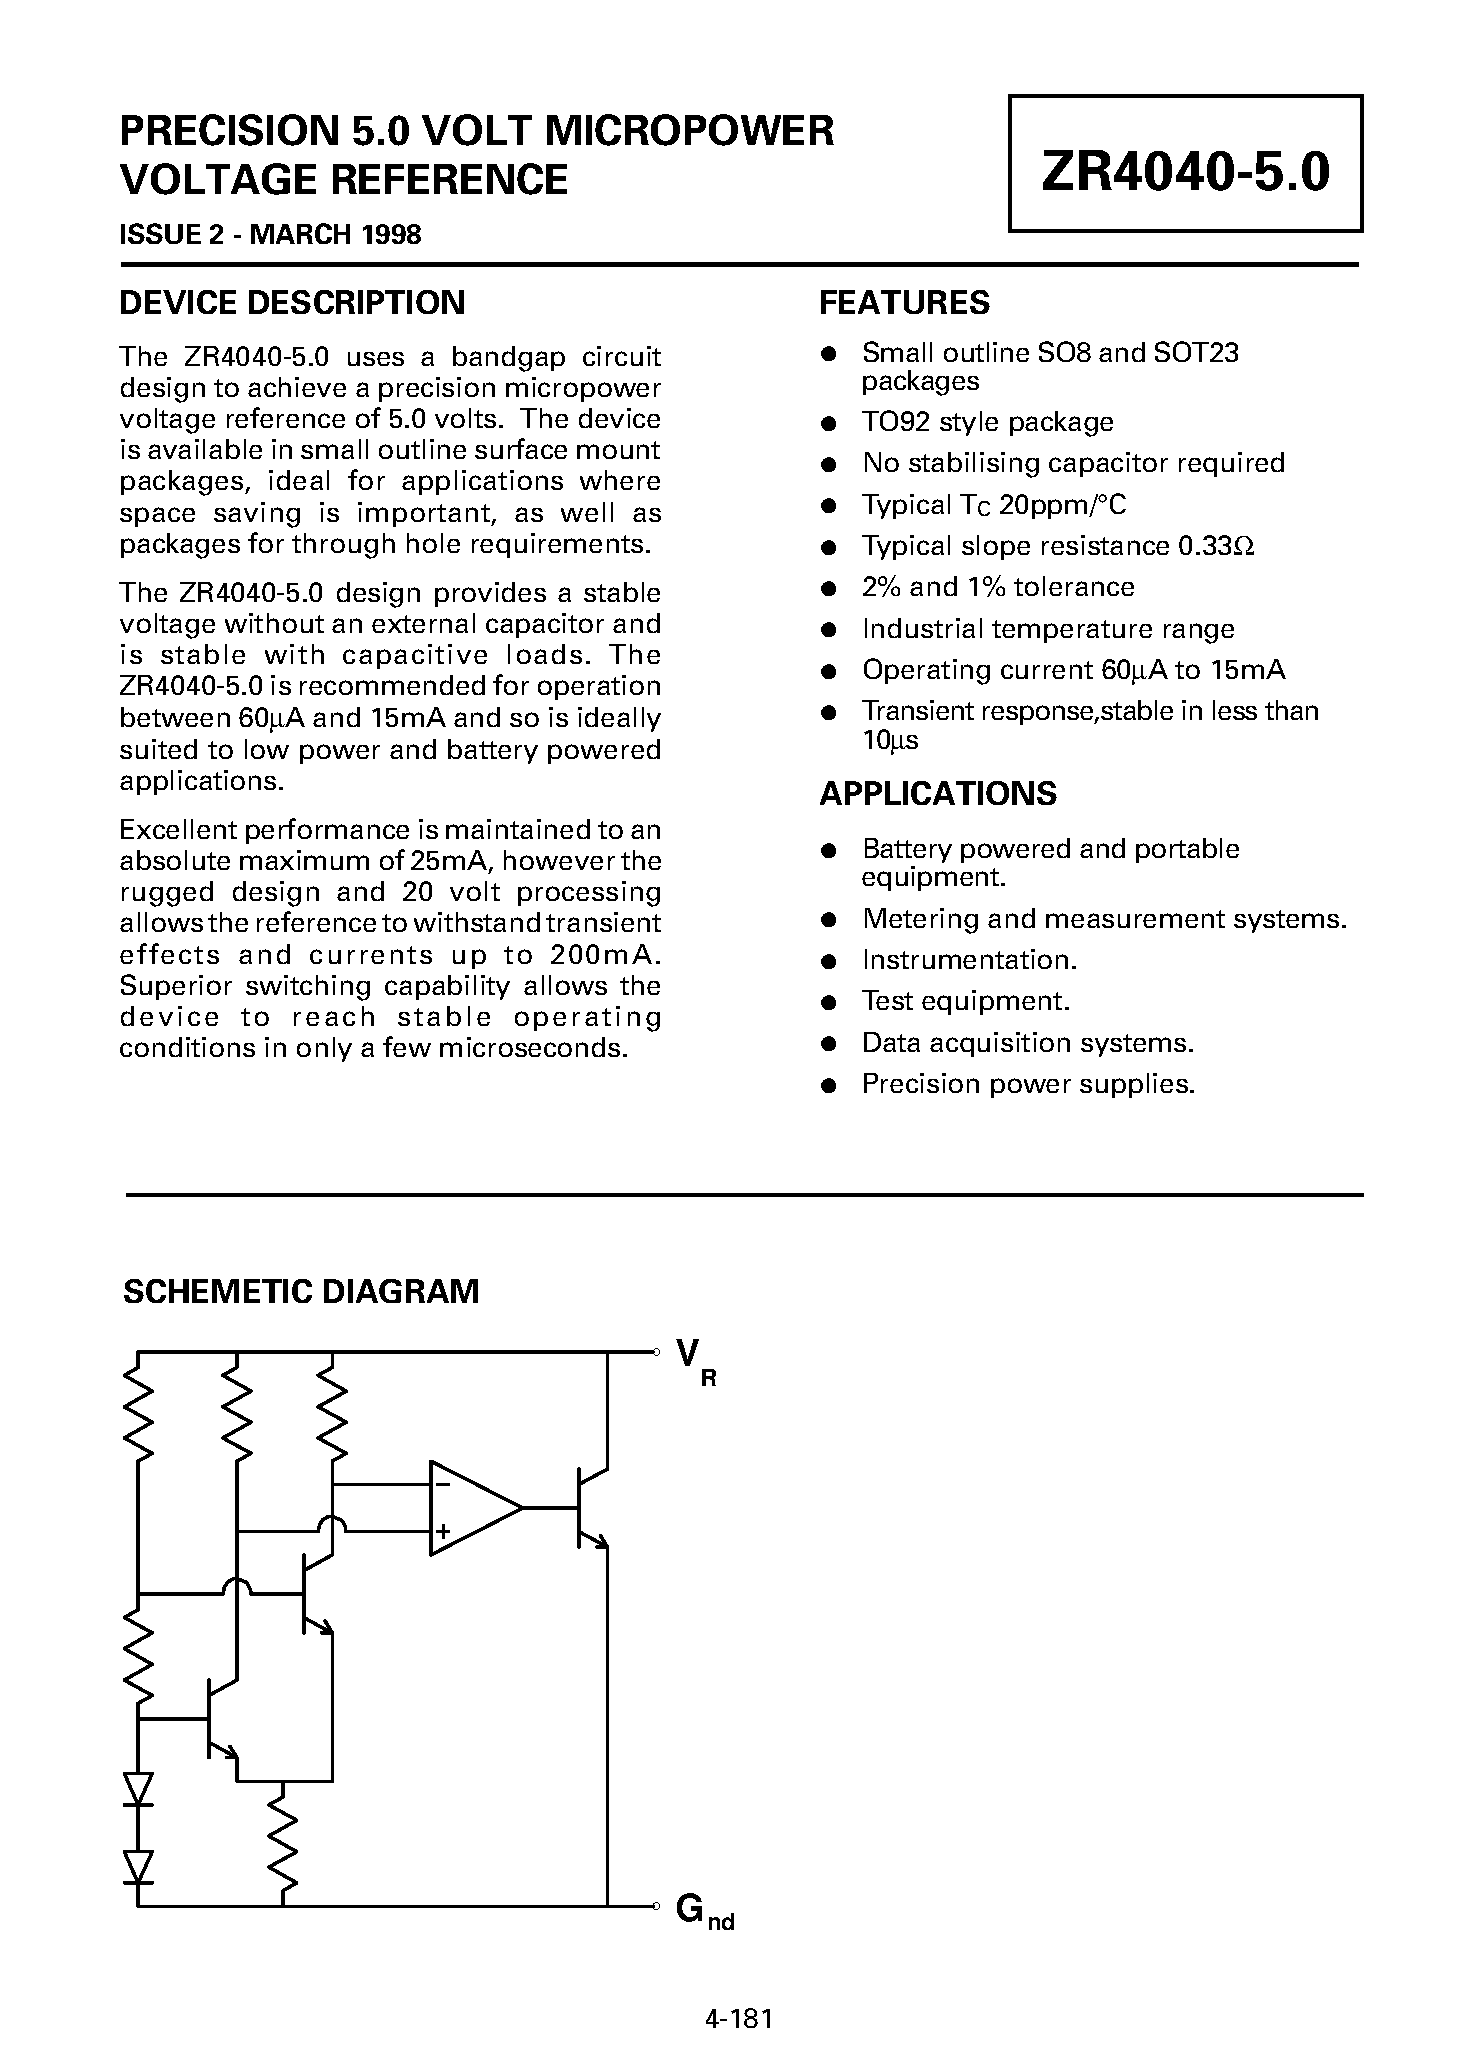 Datasheet ZR40402R50 - PRECISION 5.0 VOLT MICROPOWER VOLTAGE REFERENCE page 1